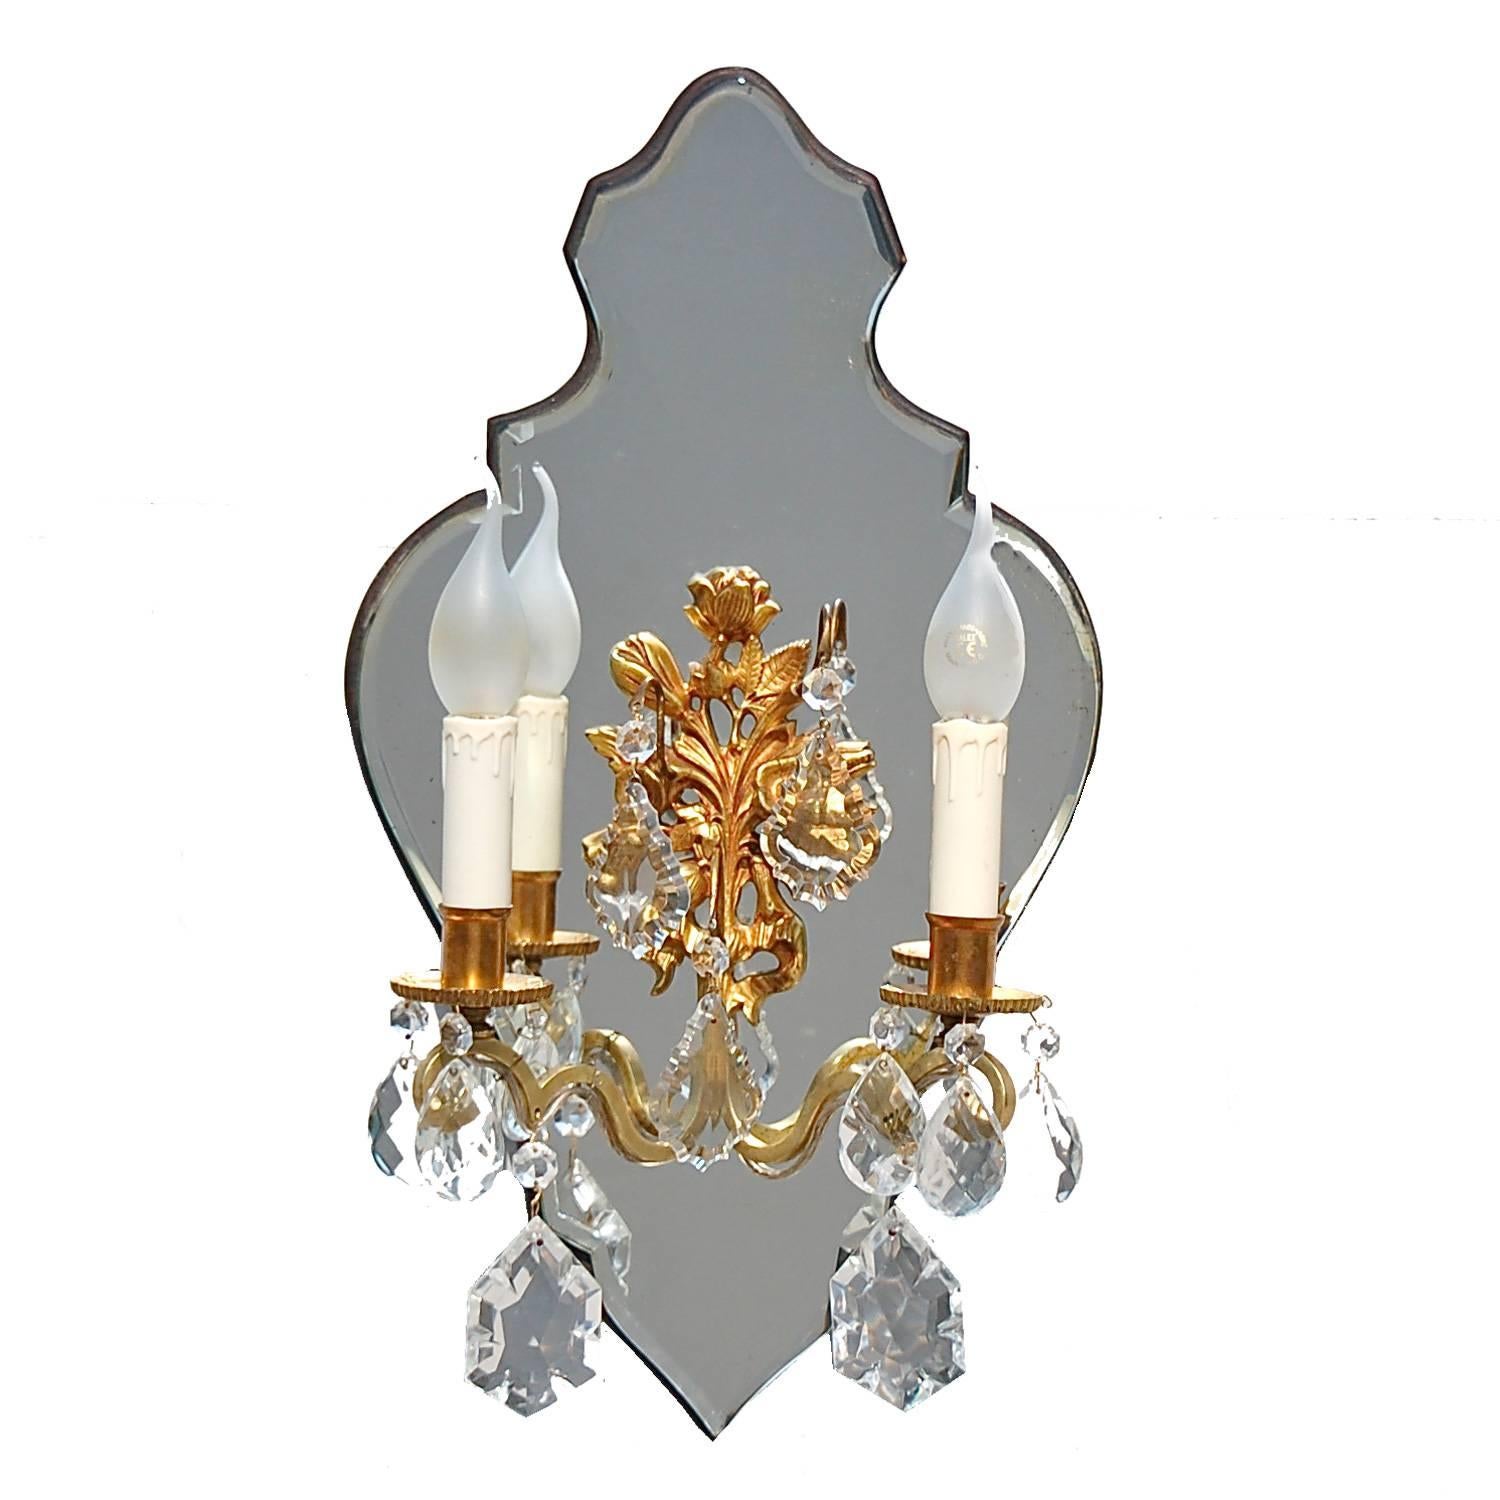 Candle Wall Sconce on Beveled Edged Mirror Backing, 1950s, France For Sale